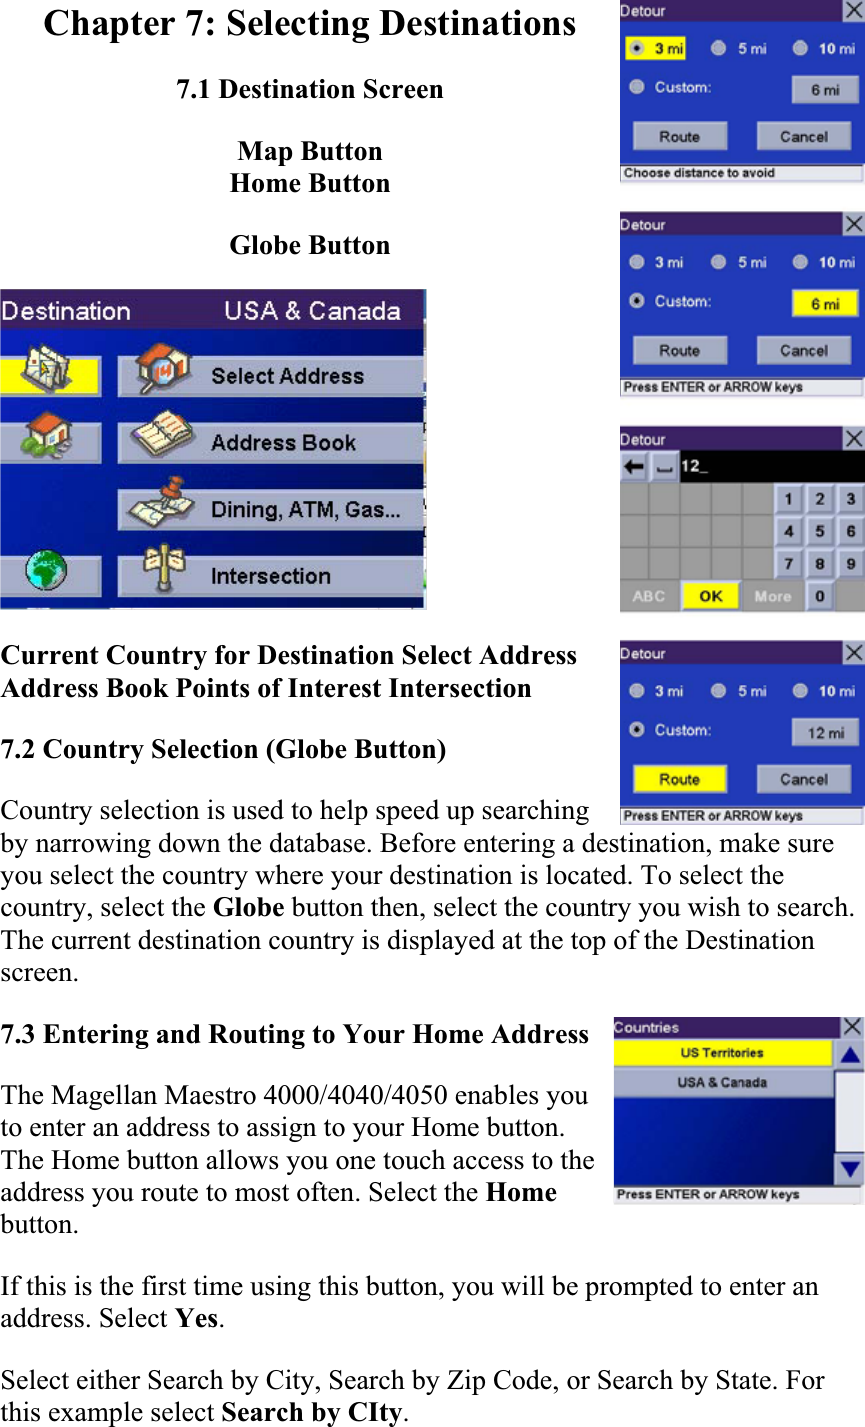 Chapter 7: Selecting Destinations 7.1 Destination Screen Map Button Home Button Globe Button Current Country for Destination Select Address Address Book Points of Interest Intersection  7.2 Country Selection (Globe Button)  Country selection is used to help speed up searching by narrowing down the database. Before entering a destination, make sure you select the country where your destination is located. To select the country, select the Globe button then, select the country you wish to search. The current destination country is displayed at the top of the Destination screen.7.3 Entering and Routing to Your Home AddressThe Magellan Maestro 4000/4040/4050 enables you to enter an address to assign to your Home button. The Home button allows you one touch access to the address you route to most often. Select the Homebutton.If this is the first time using this button, you will be prompted to enter an address. Select Yes.Select either Search by City, Search by Zip Code, or Search by State. For this example select Search by CIty.